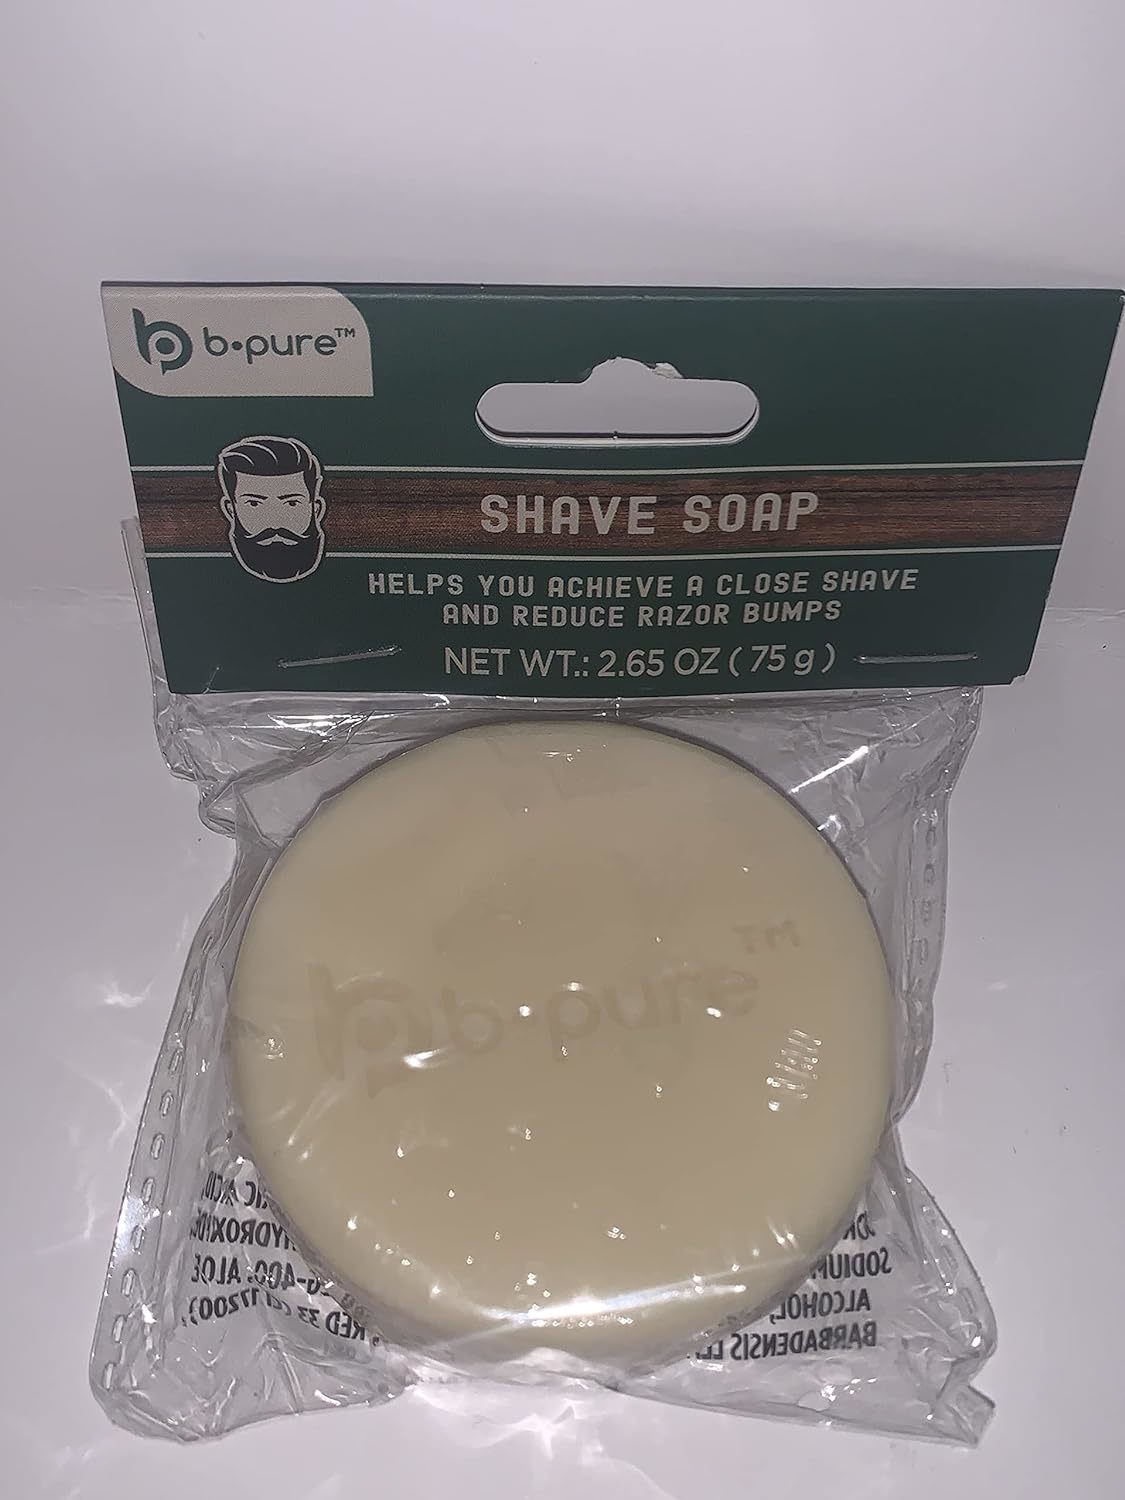 Shave soap - $16.99